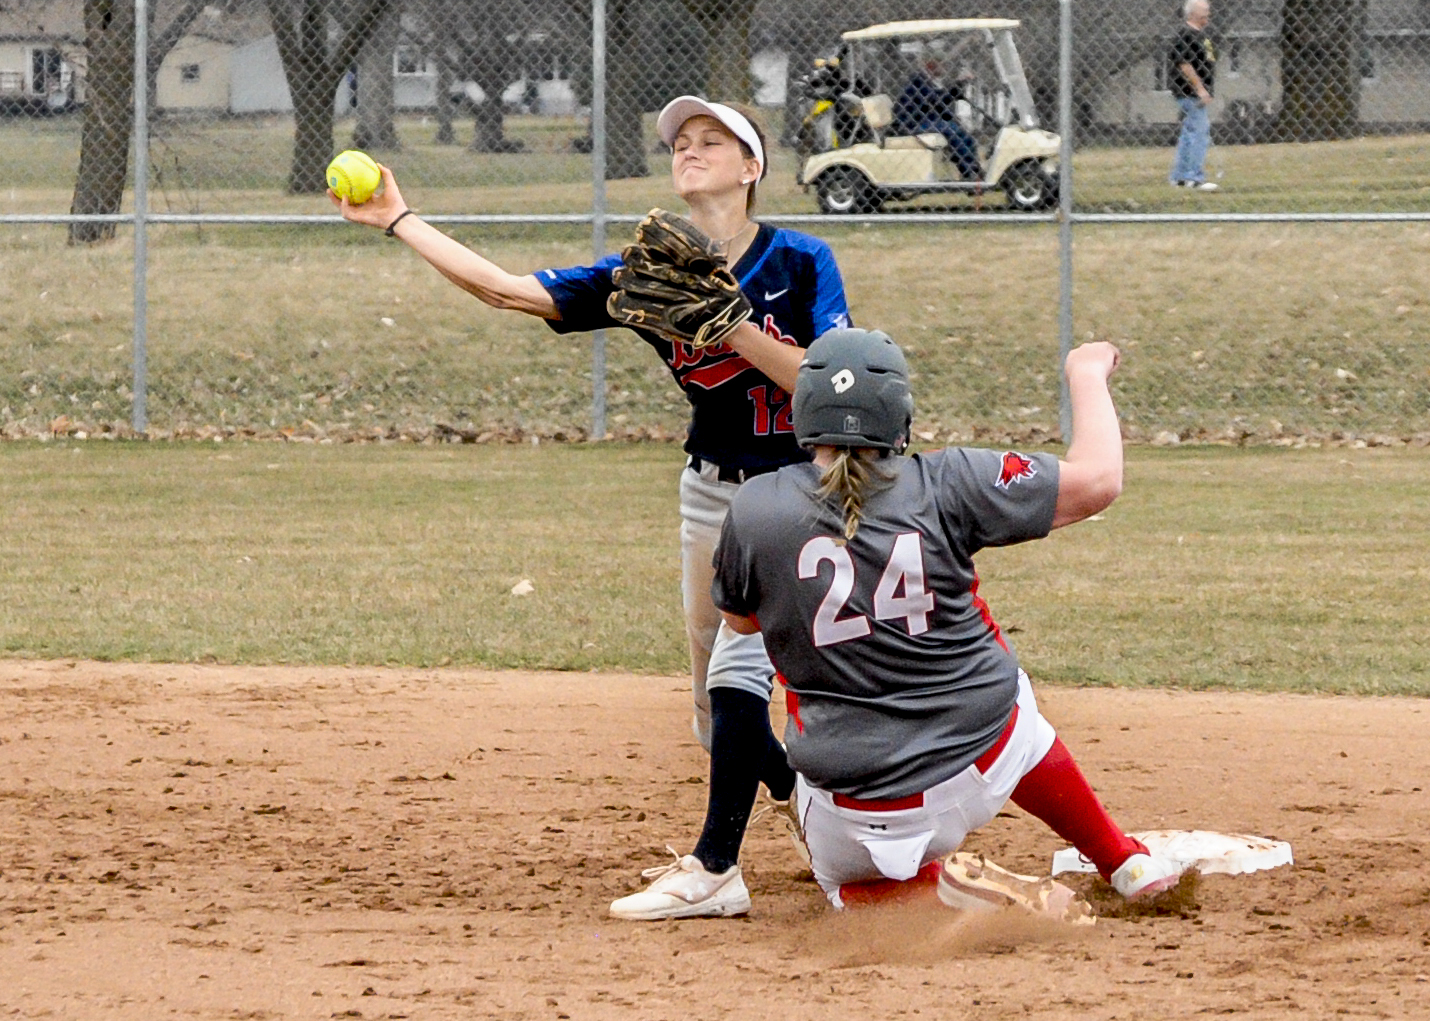 Mia Ruther turning a double play